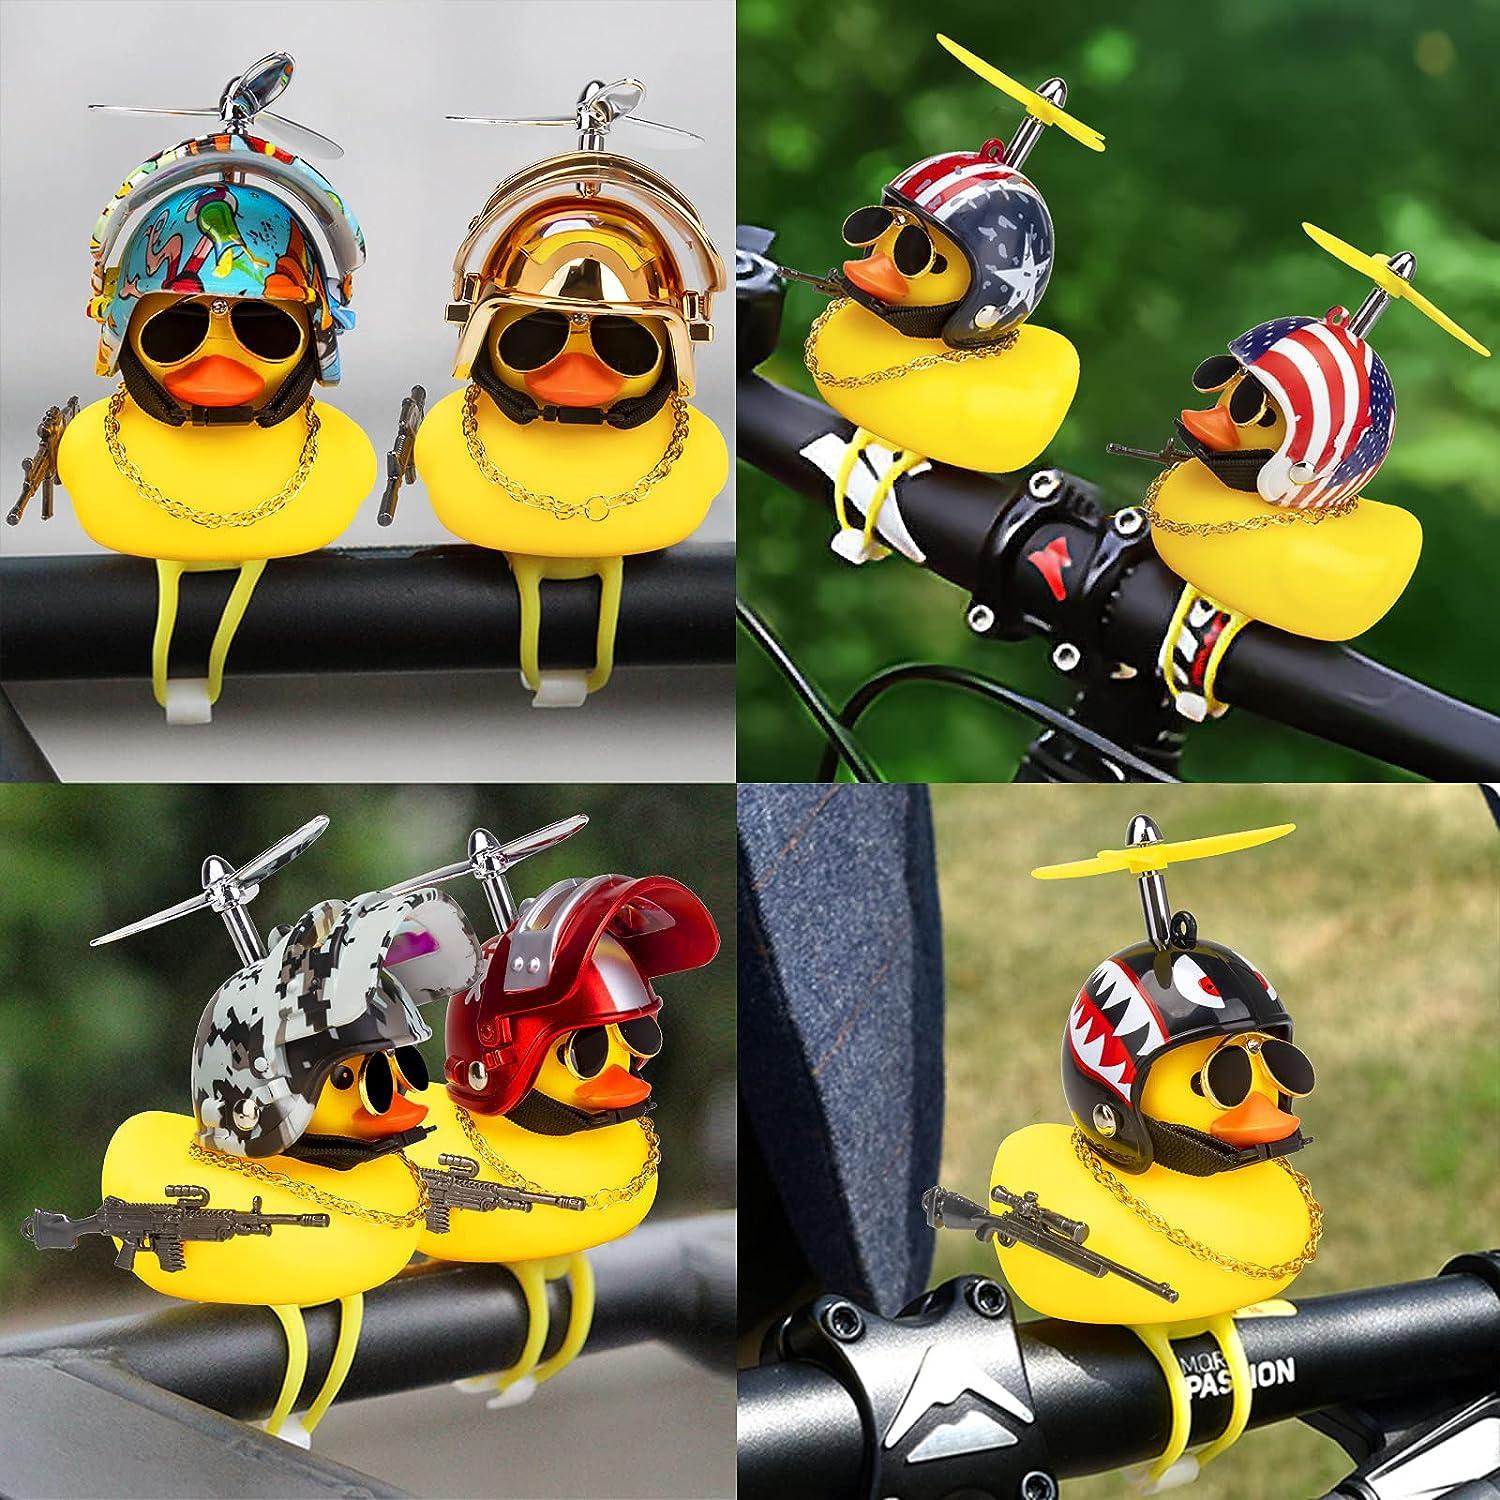 wonuu Rubber Duck Car Ornaments, Squeeze Duck Dashboard Decorations Kids Bicycle  Decor for Cycling Motorcycle & Bicycle Accessories Decorations Digital  Camo-L&G